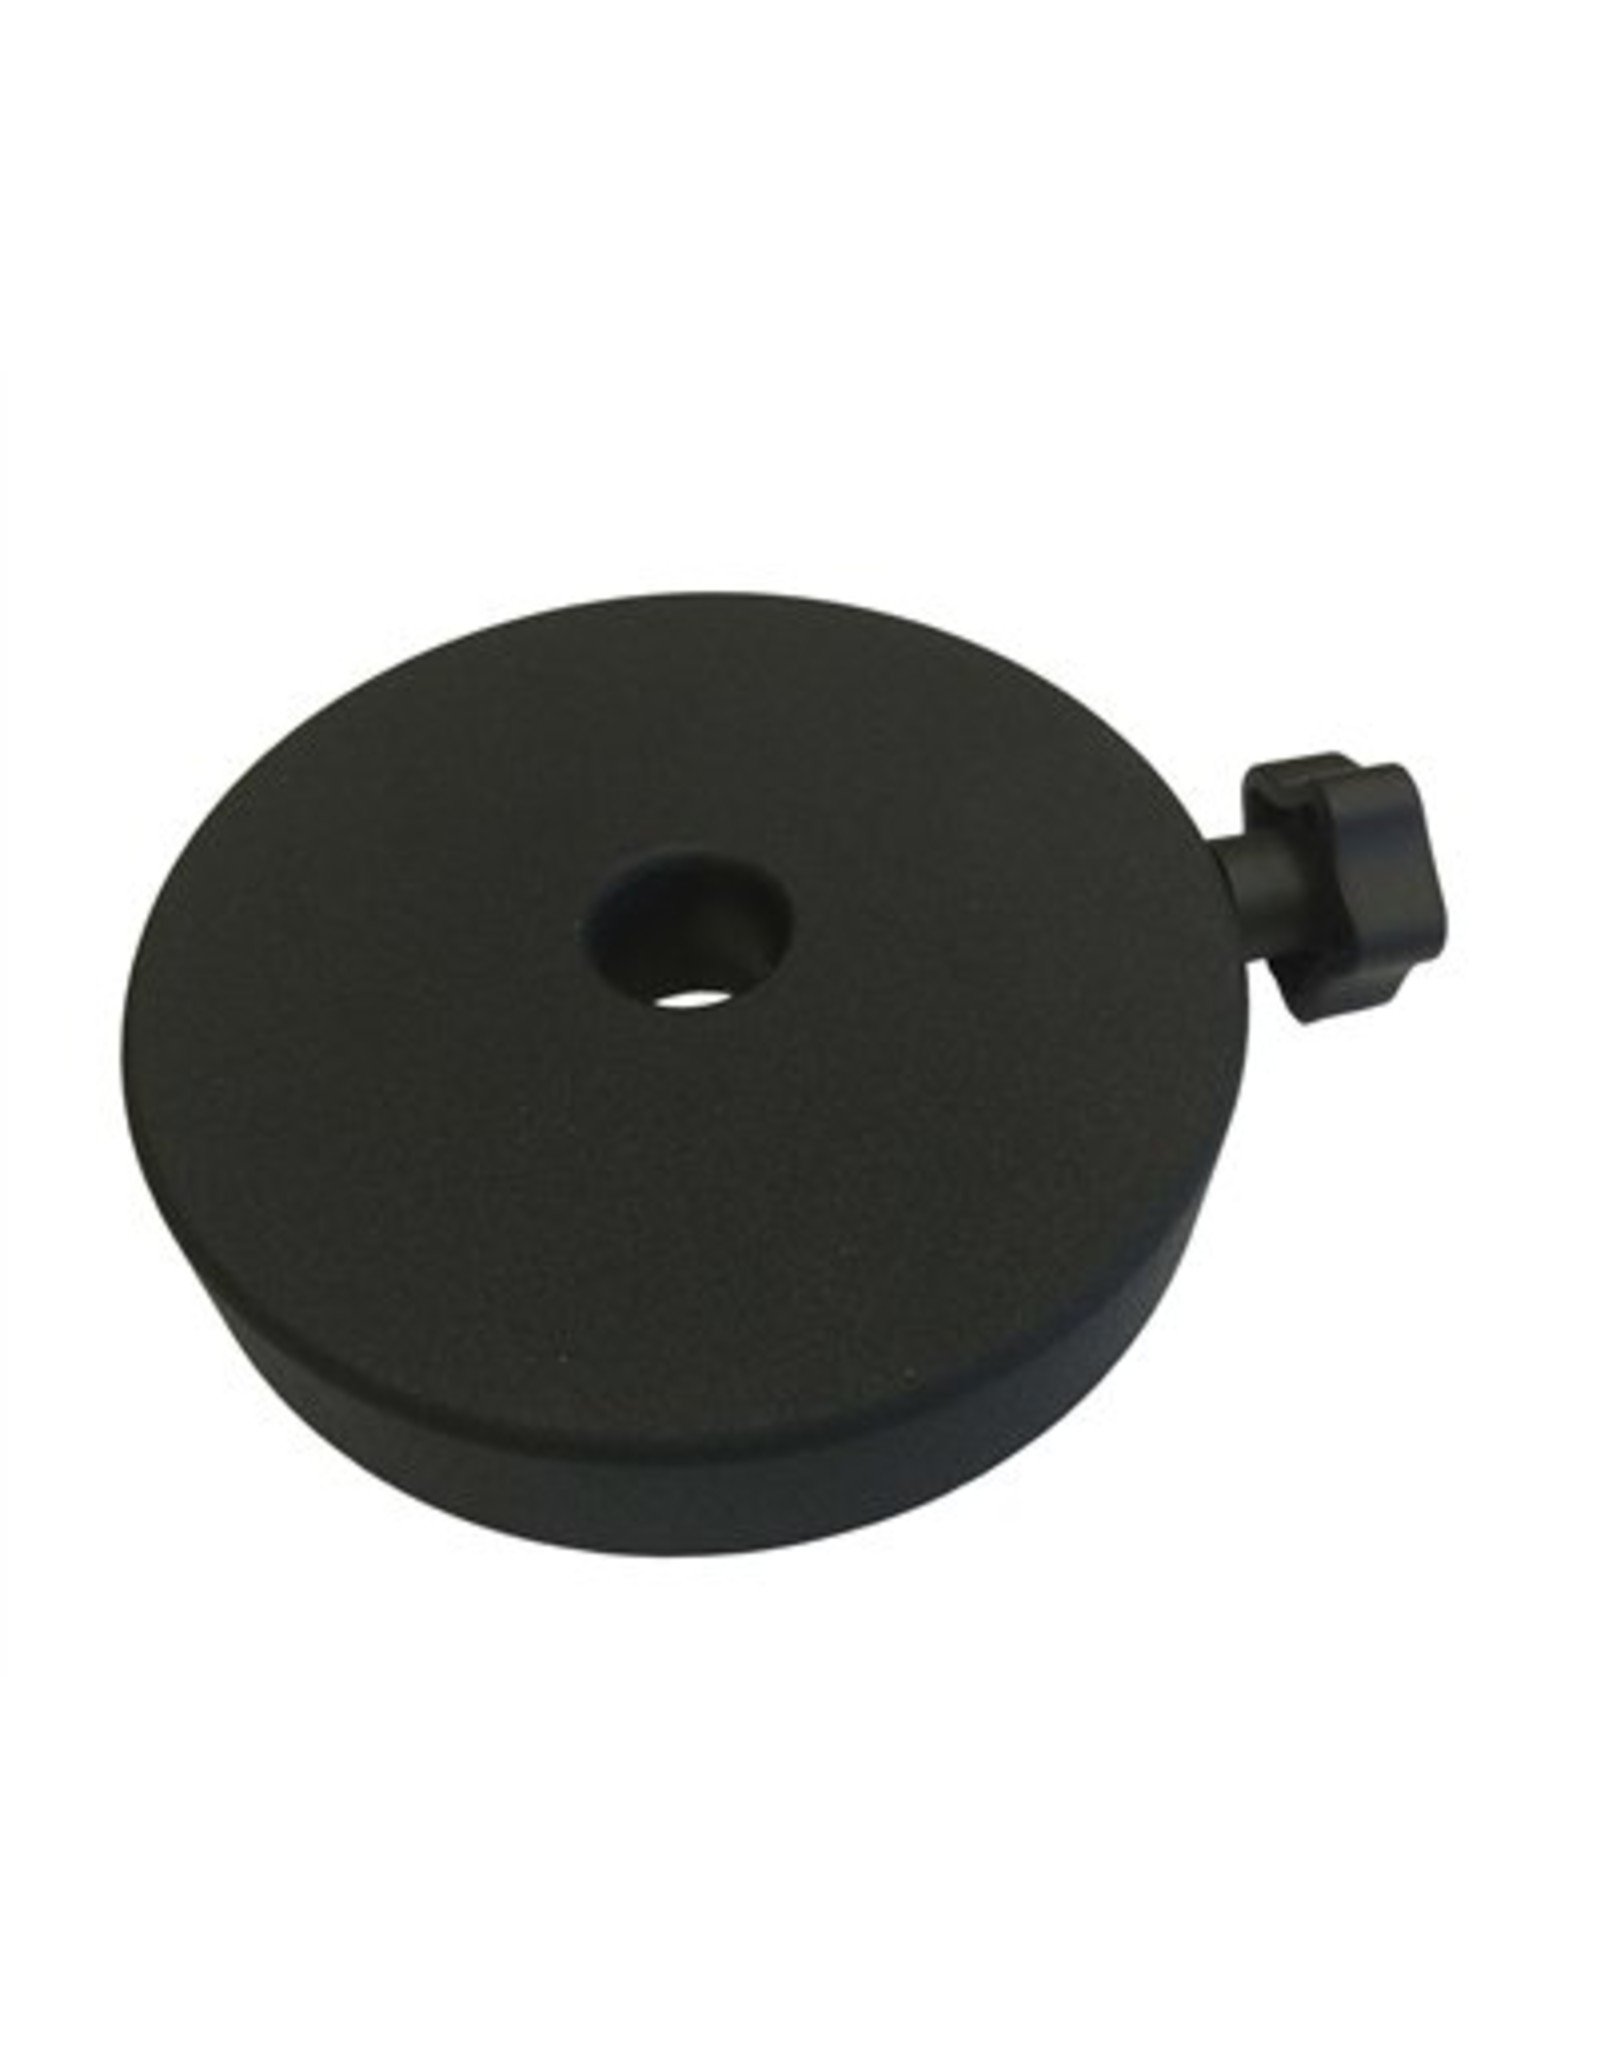 iOptron IOptron 2.0kg (4.5 LB) (20mm Shaft) Counterweight for iEQ30, MT, ZEQ/CEM25 or similar